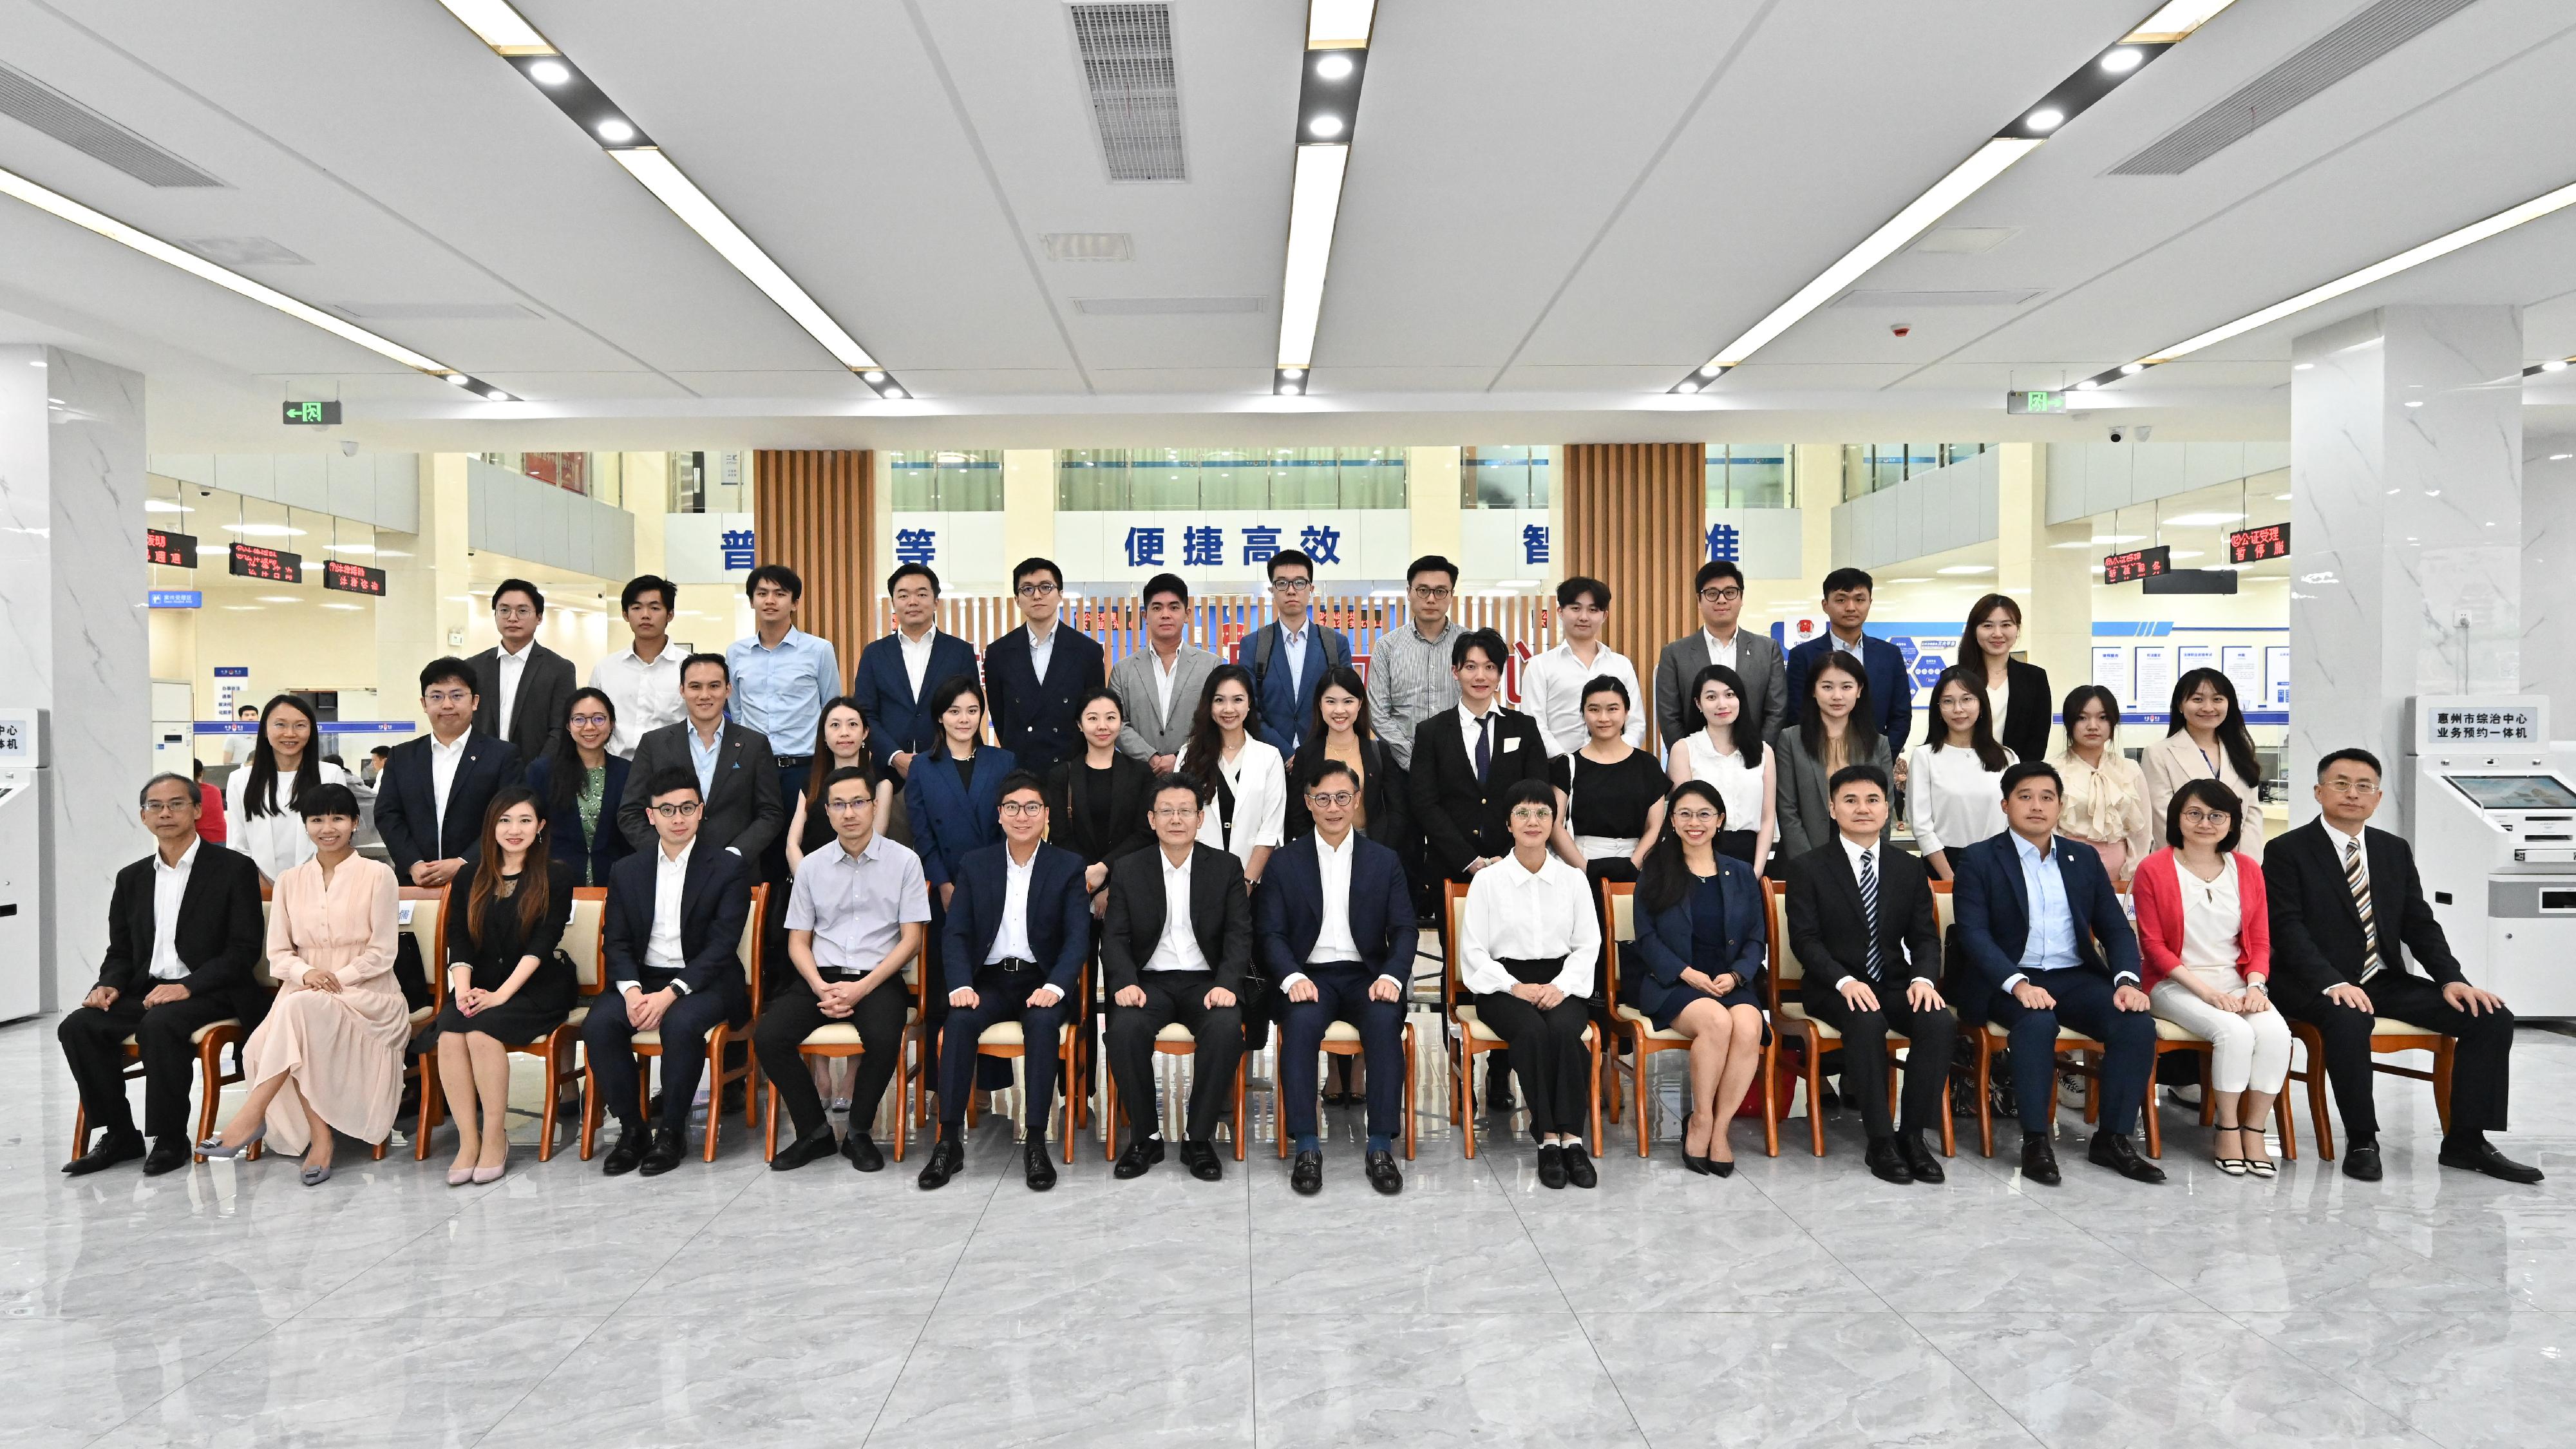 The Deputy Secretary for Justice, Mr Cheung Kwok-kwan, led a delegation comprising young lawyers and law students to call on the Huizhou Municipal People's Government today (September 7). Photo shows Mr Cheung (front row, seventh right), Vice Mayor of Huizhou Municipal People's Government Mr Yu Jialiang (front row, seventh left), and other members of the delegation at the Public Legal Service Center of Huizhou.
